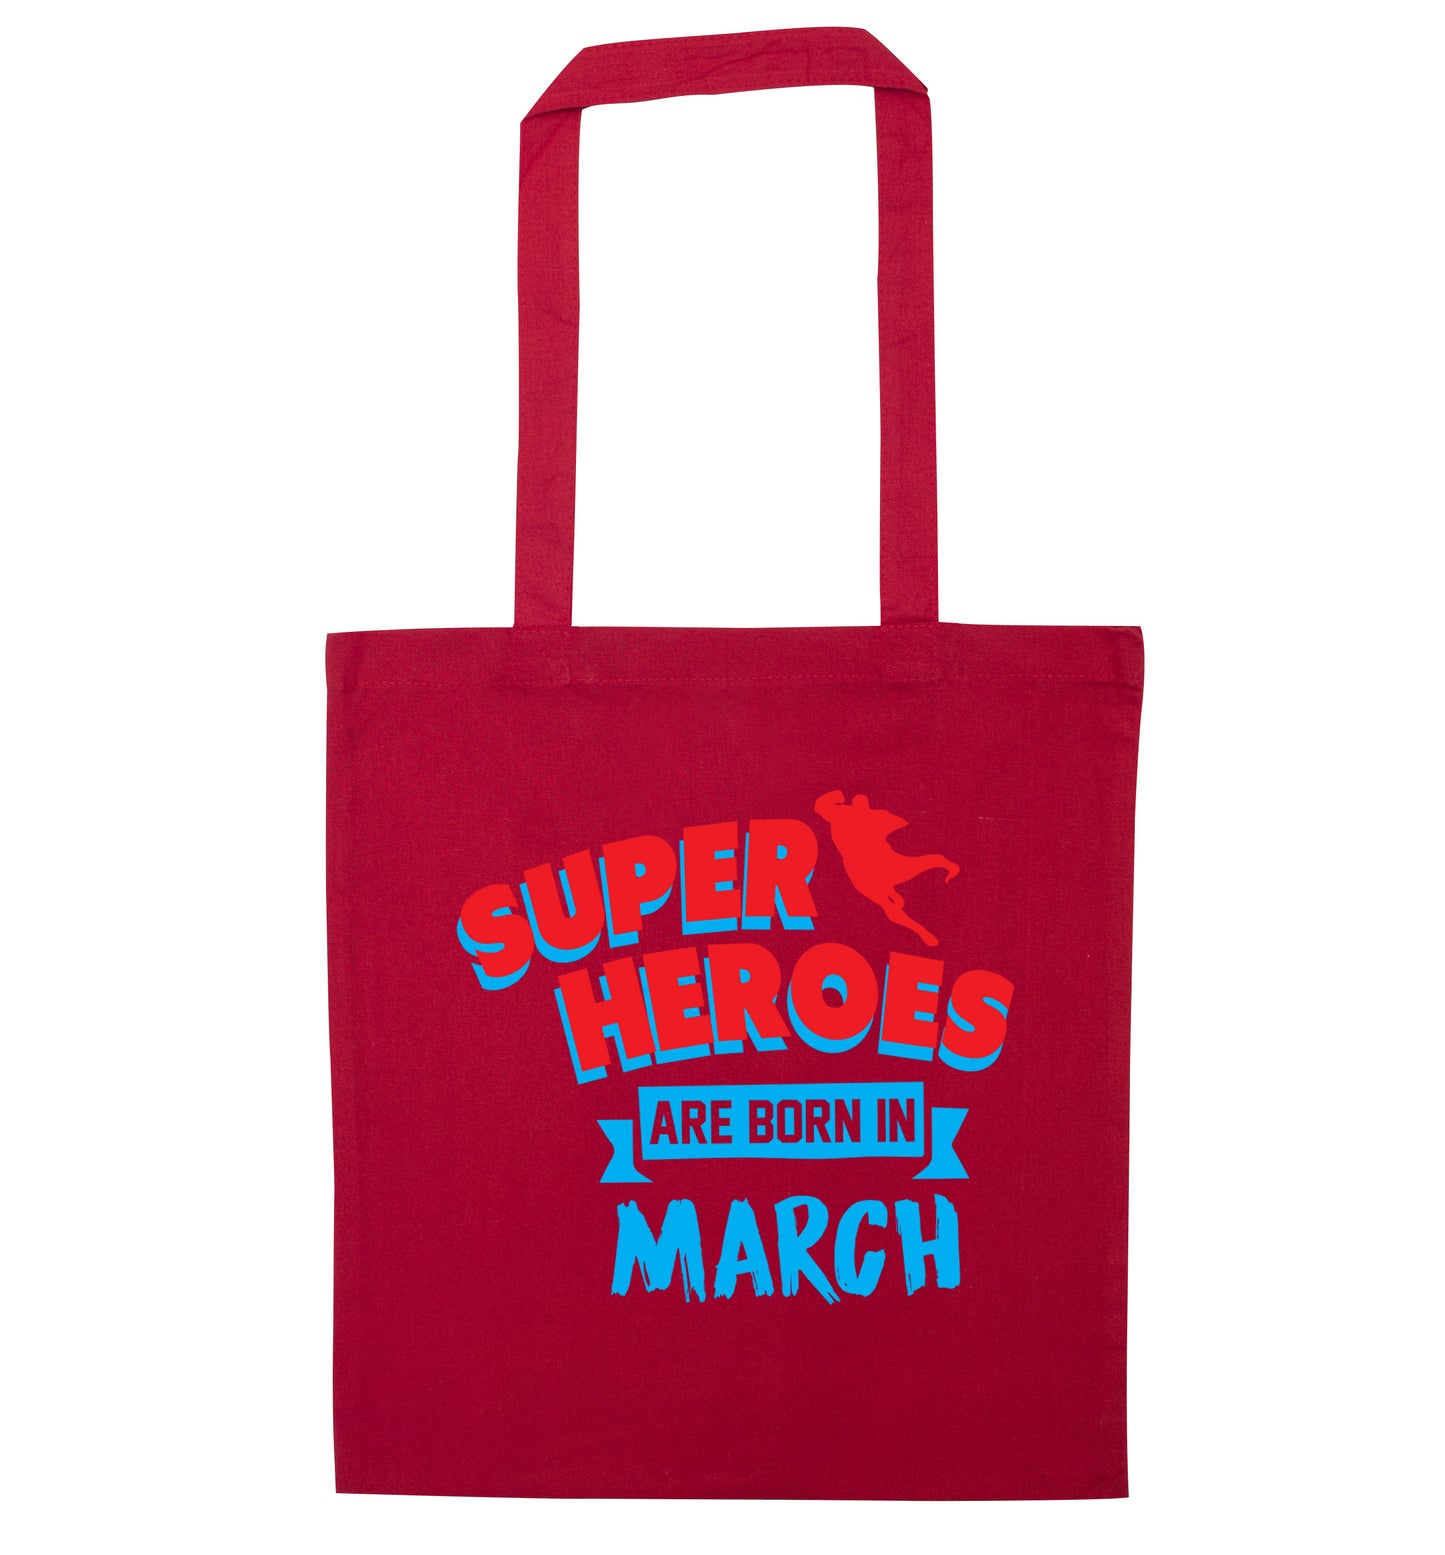 Superheros are born in March red tote bag